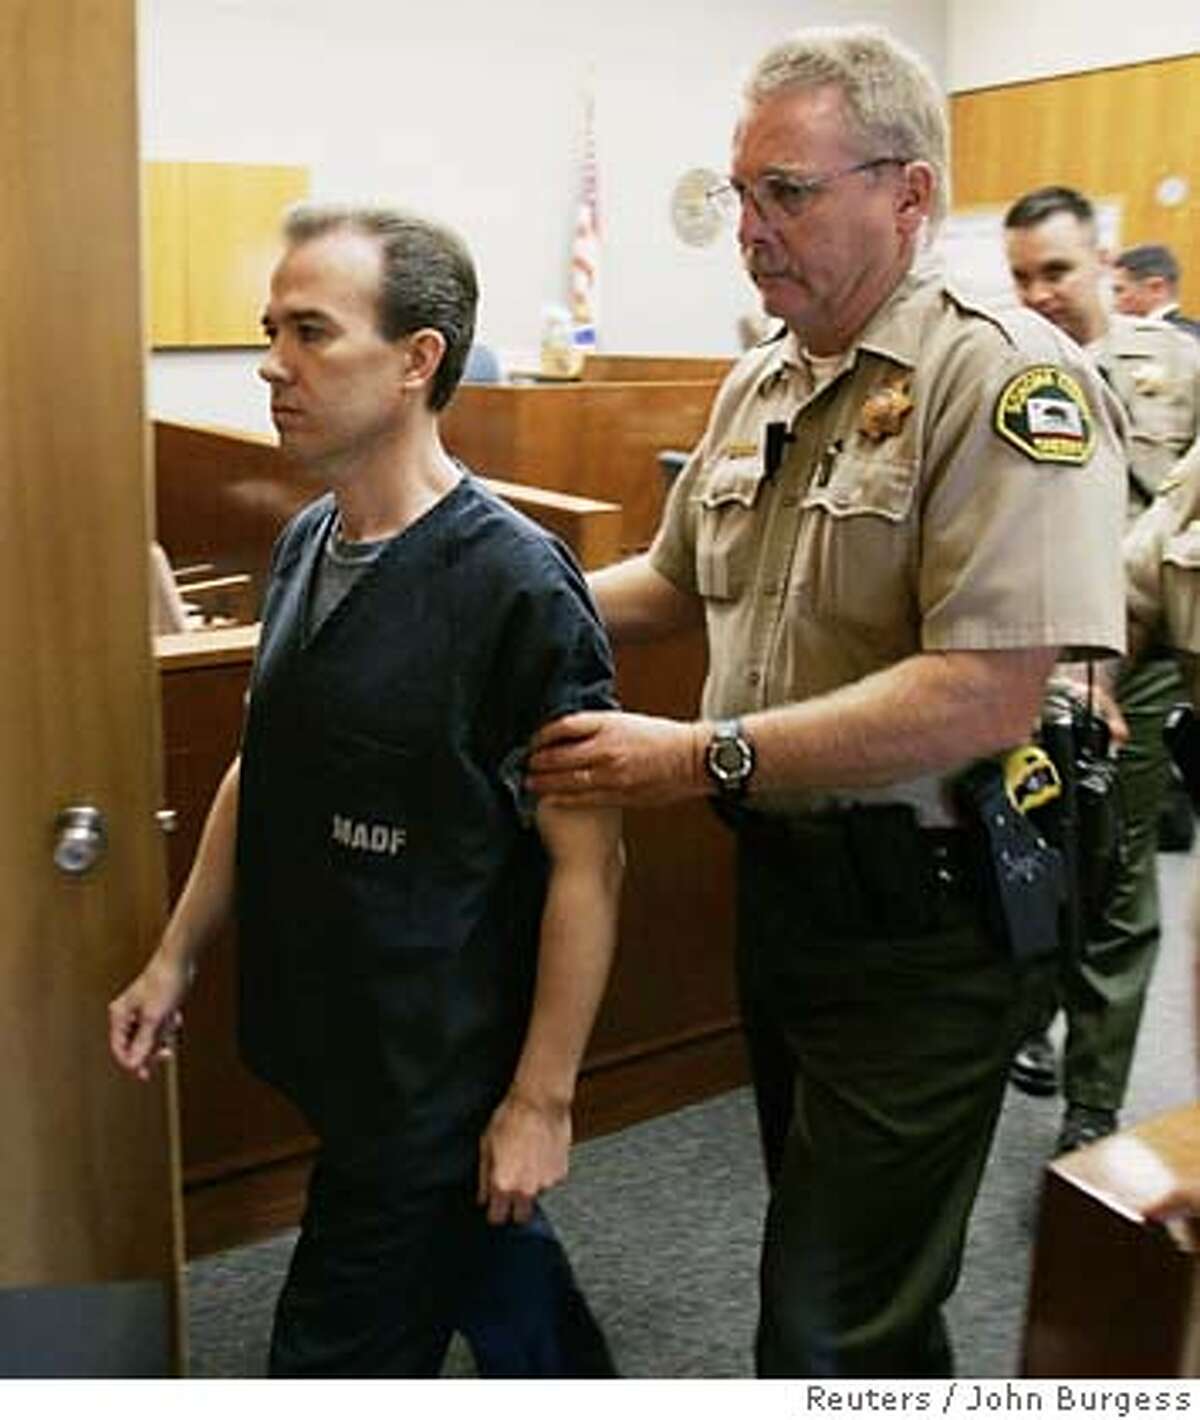 John Mark Karr (L) is taken out of a court room after a bail hearing in Santa Rosa, California, September 19, 2006. Karr, the schoolteacher who made worldwide headlines by confessing to one of America's most notorious unsolved crimes, the murder of six-year-old JonBenet Ramsey, is now facing charges of five counts of possessing child pornography.REUTERS/John Burgess/Pool (UNITED STATES)